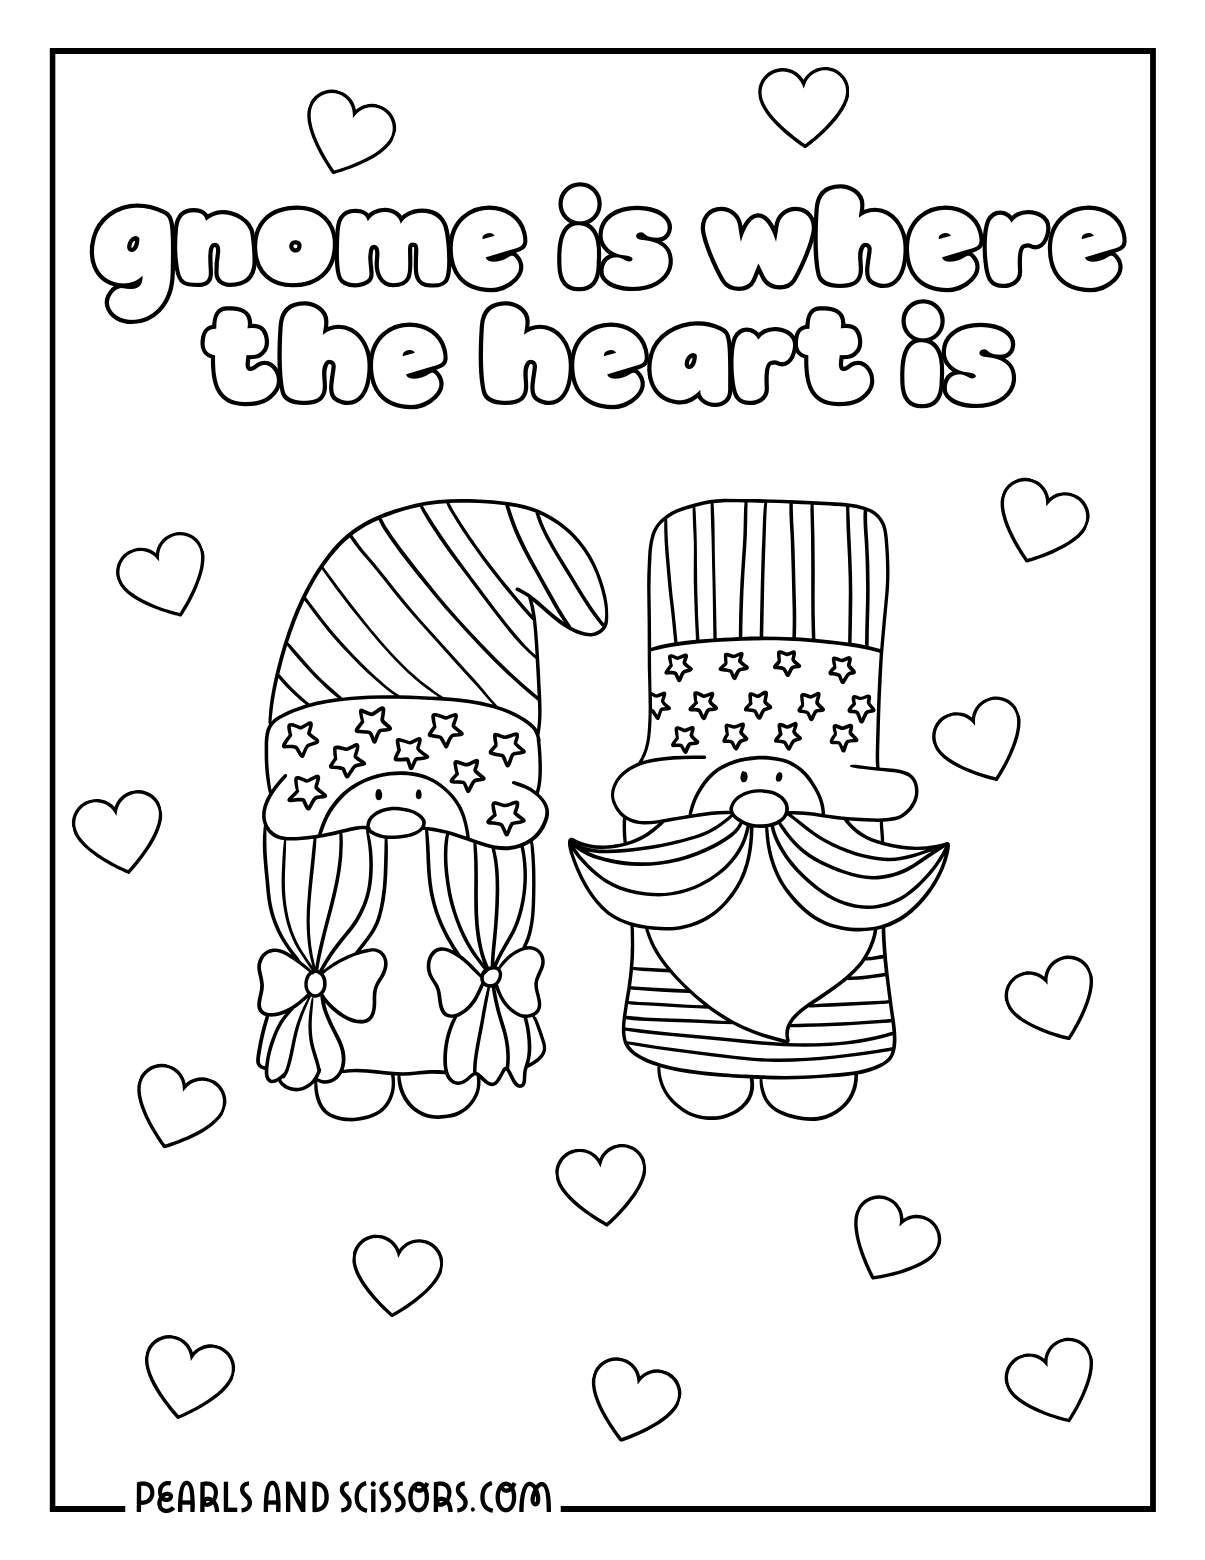 Gnome is where the heart is cute coloring page.